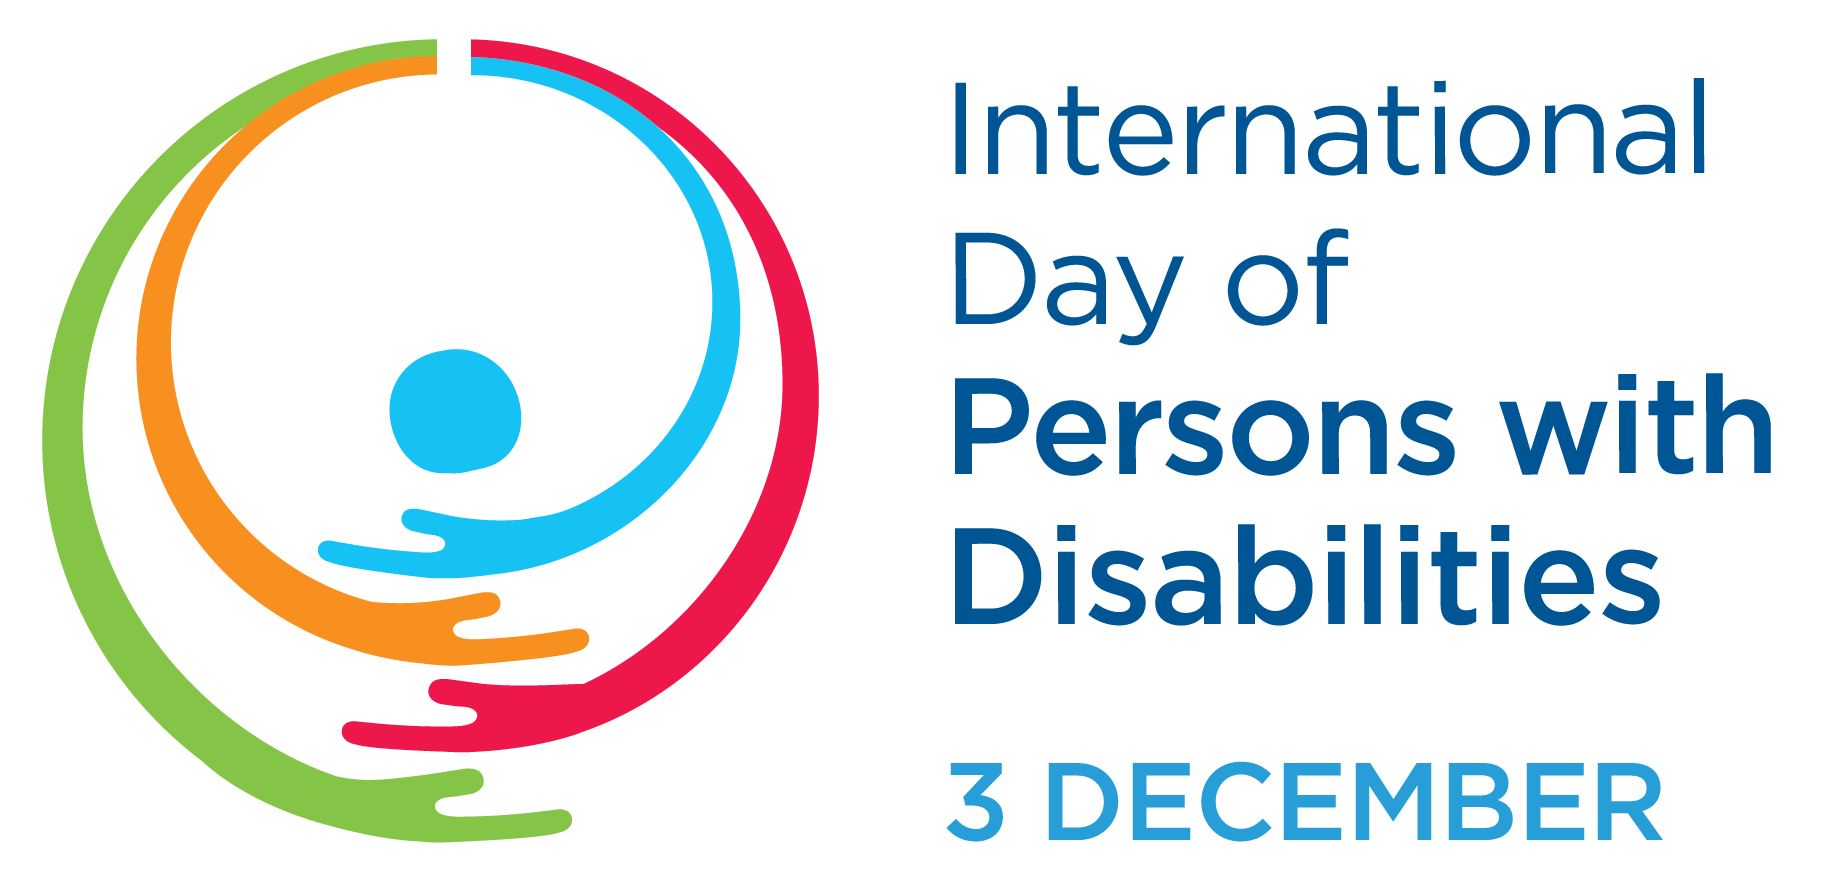 International Day of Persons with Disabilities 3 December United